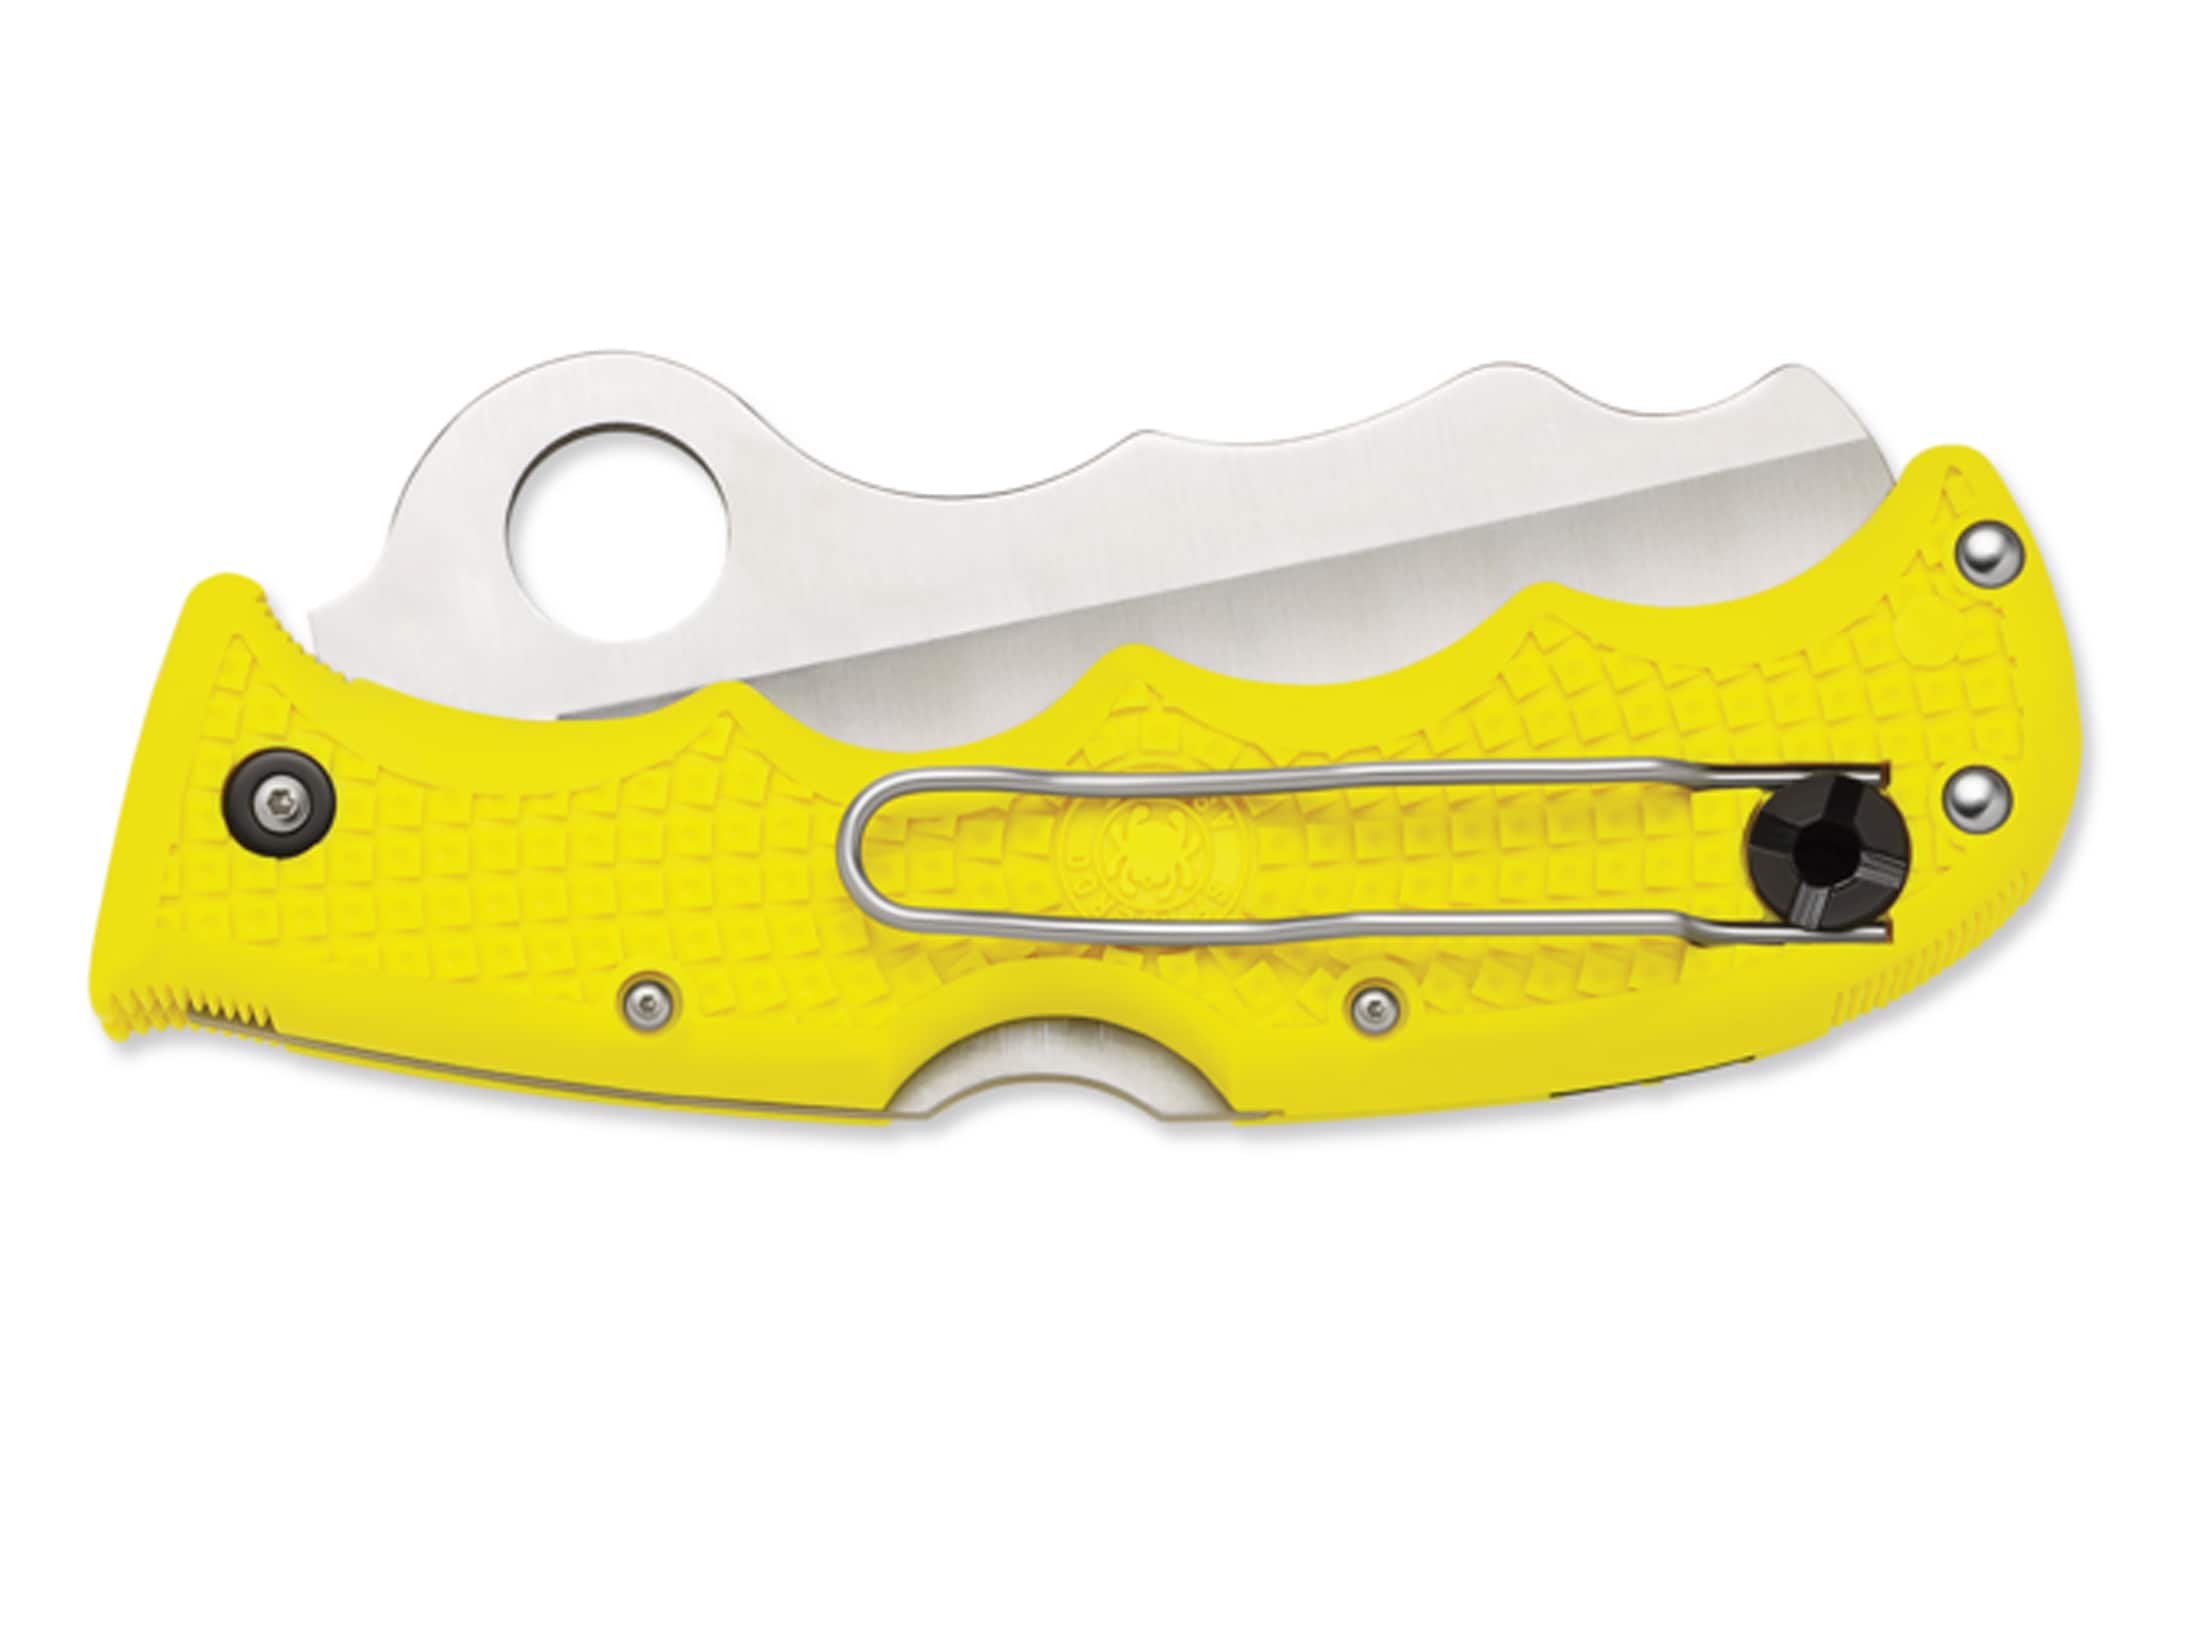 Spyderco Assist Salt Assisted Opening Folding Knife 3.687″ Sheepsfoot Point Partially Serrated H-1 Stainless Steel Blade FRN Handle Yellow For Sale